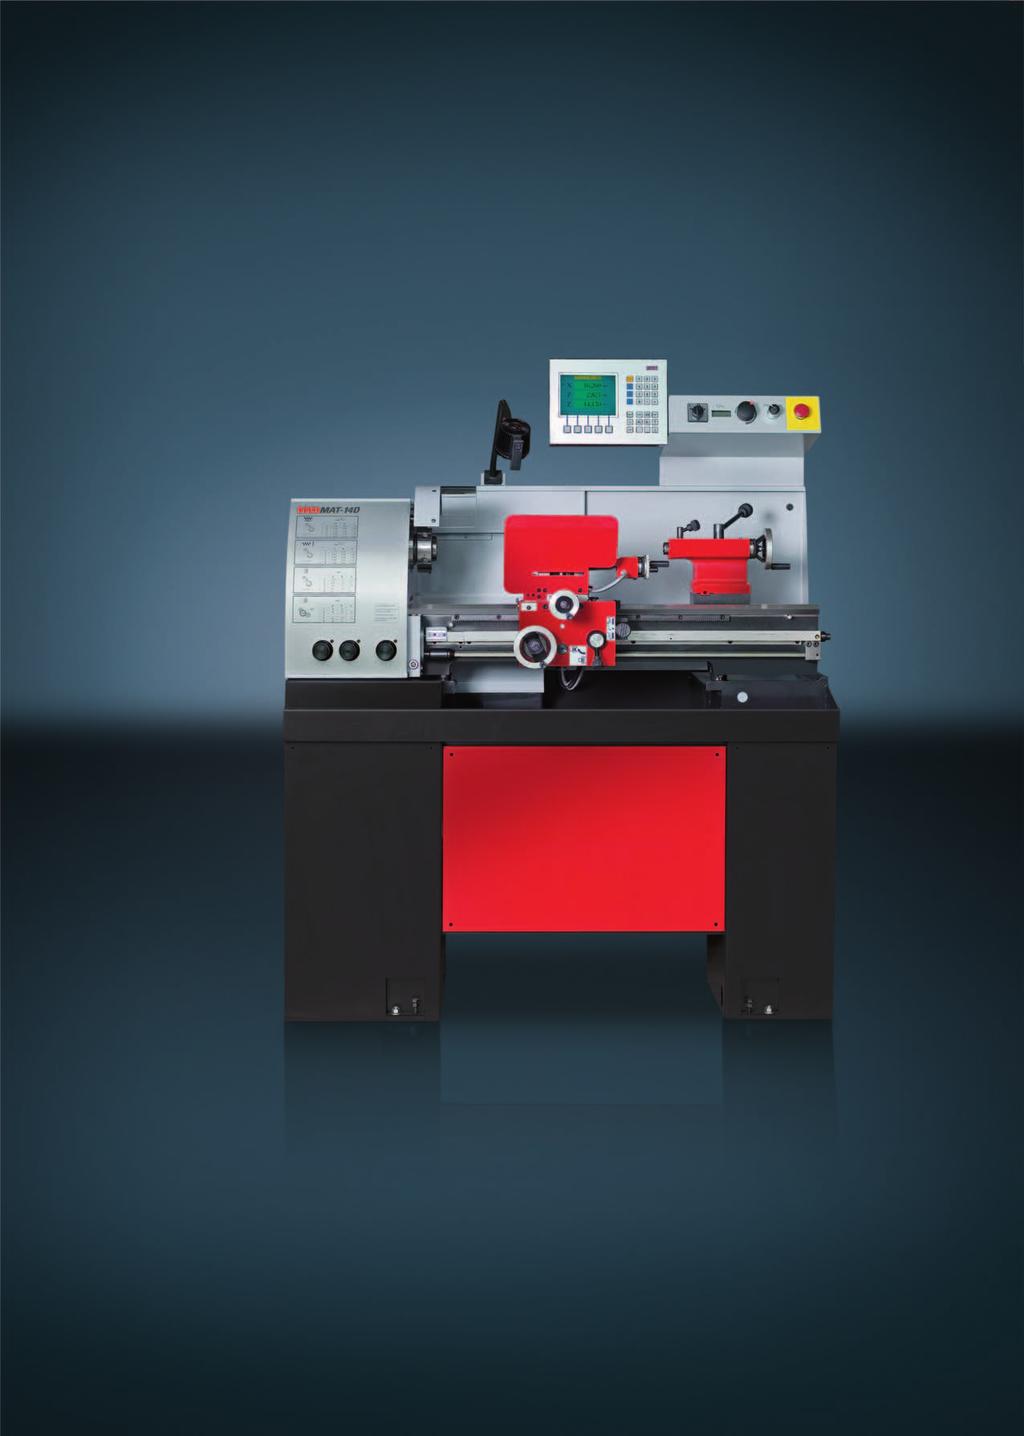 EMCOMAT 14S/14D [ Digital display] - 3-axis digital display with color screen (EMCOMAT 14D) [ Chuck protection] - With limit switch - Main spindle with 40 mm spindle bore [ Tailstock] - Made from